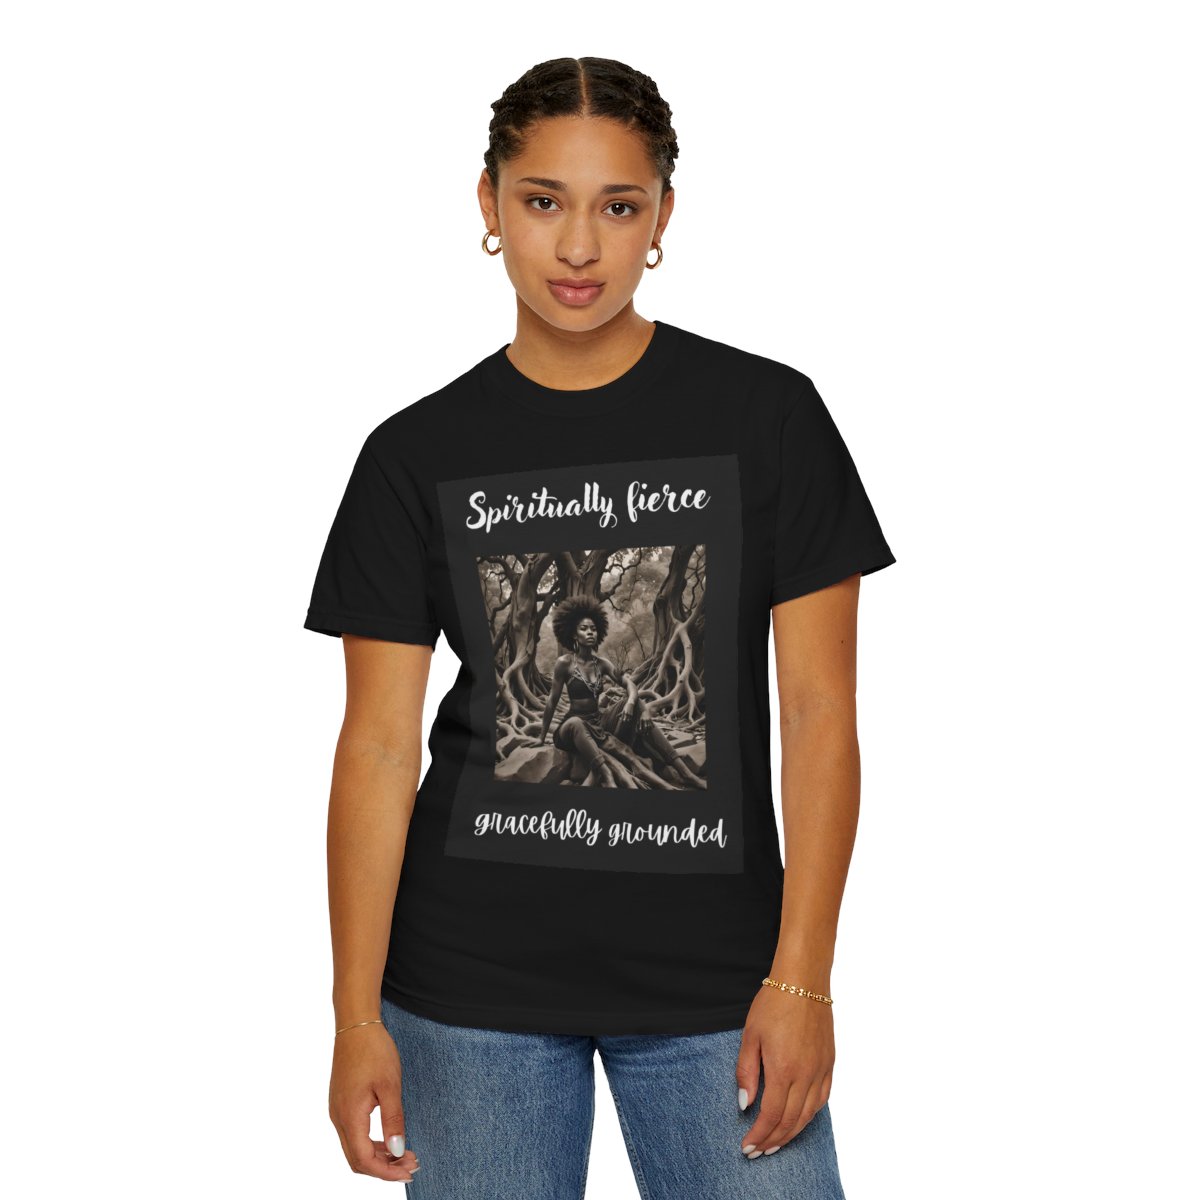 Introducing the Spiritually Fierce Women's Garment-Dyed T-shirt, priced at $23.28 (Excl. Tax)! Shipping to the United States is estimated at $4.75. Embrace your spiritual fierceness in style! #SpiritualFashion #TrendyTees #FierceWomen
concrete-t-shop.printify.me/product/788108…